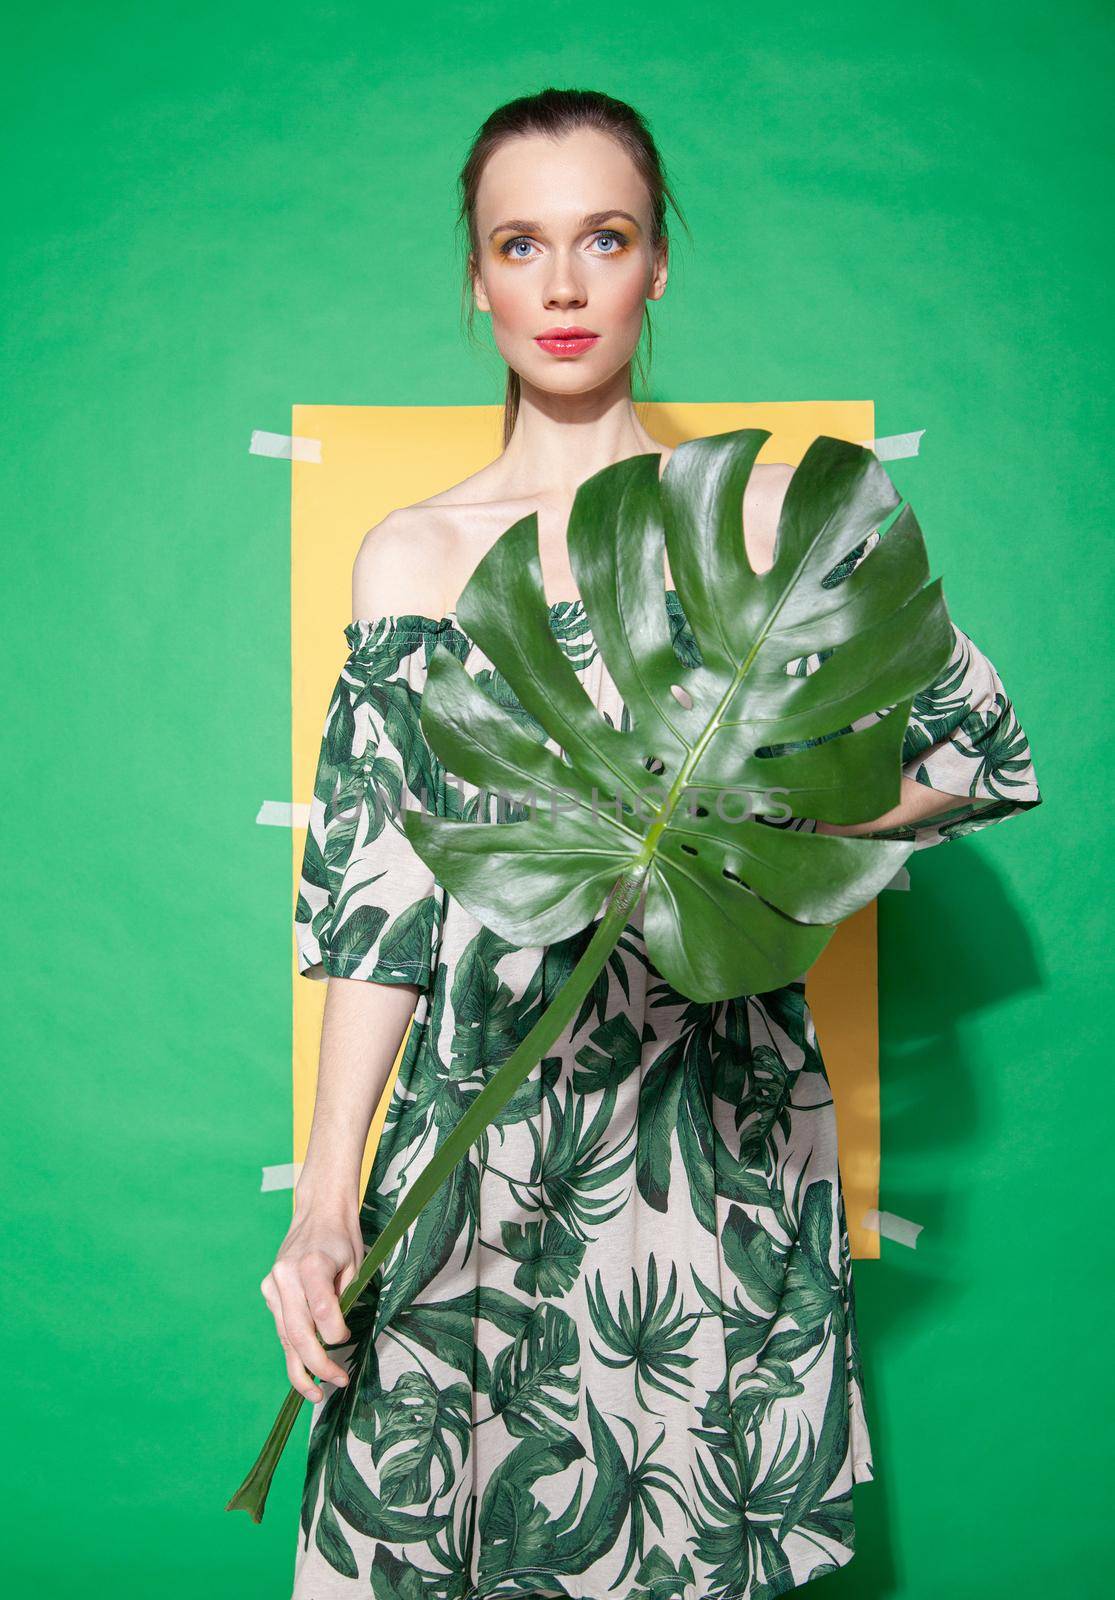 Young female model in stylish dress with floral ornament holding leaf while standing against yellow paper sheet on green background in summer